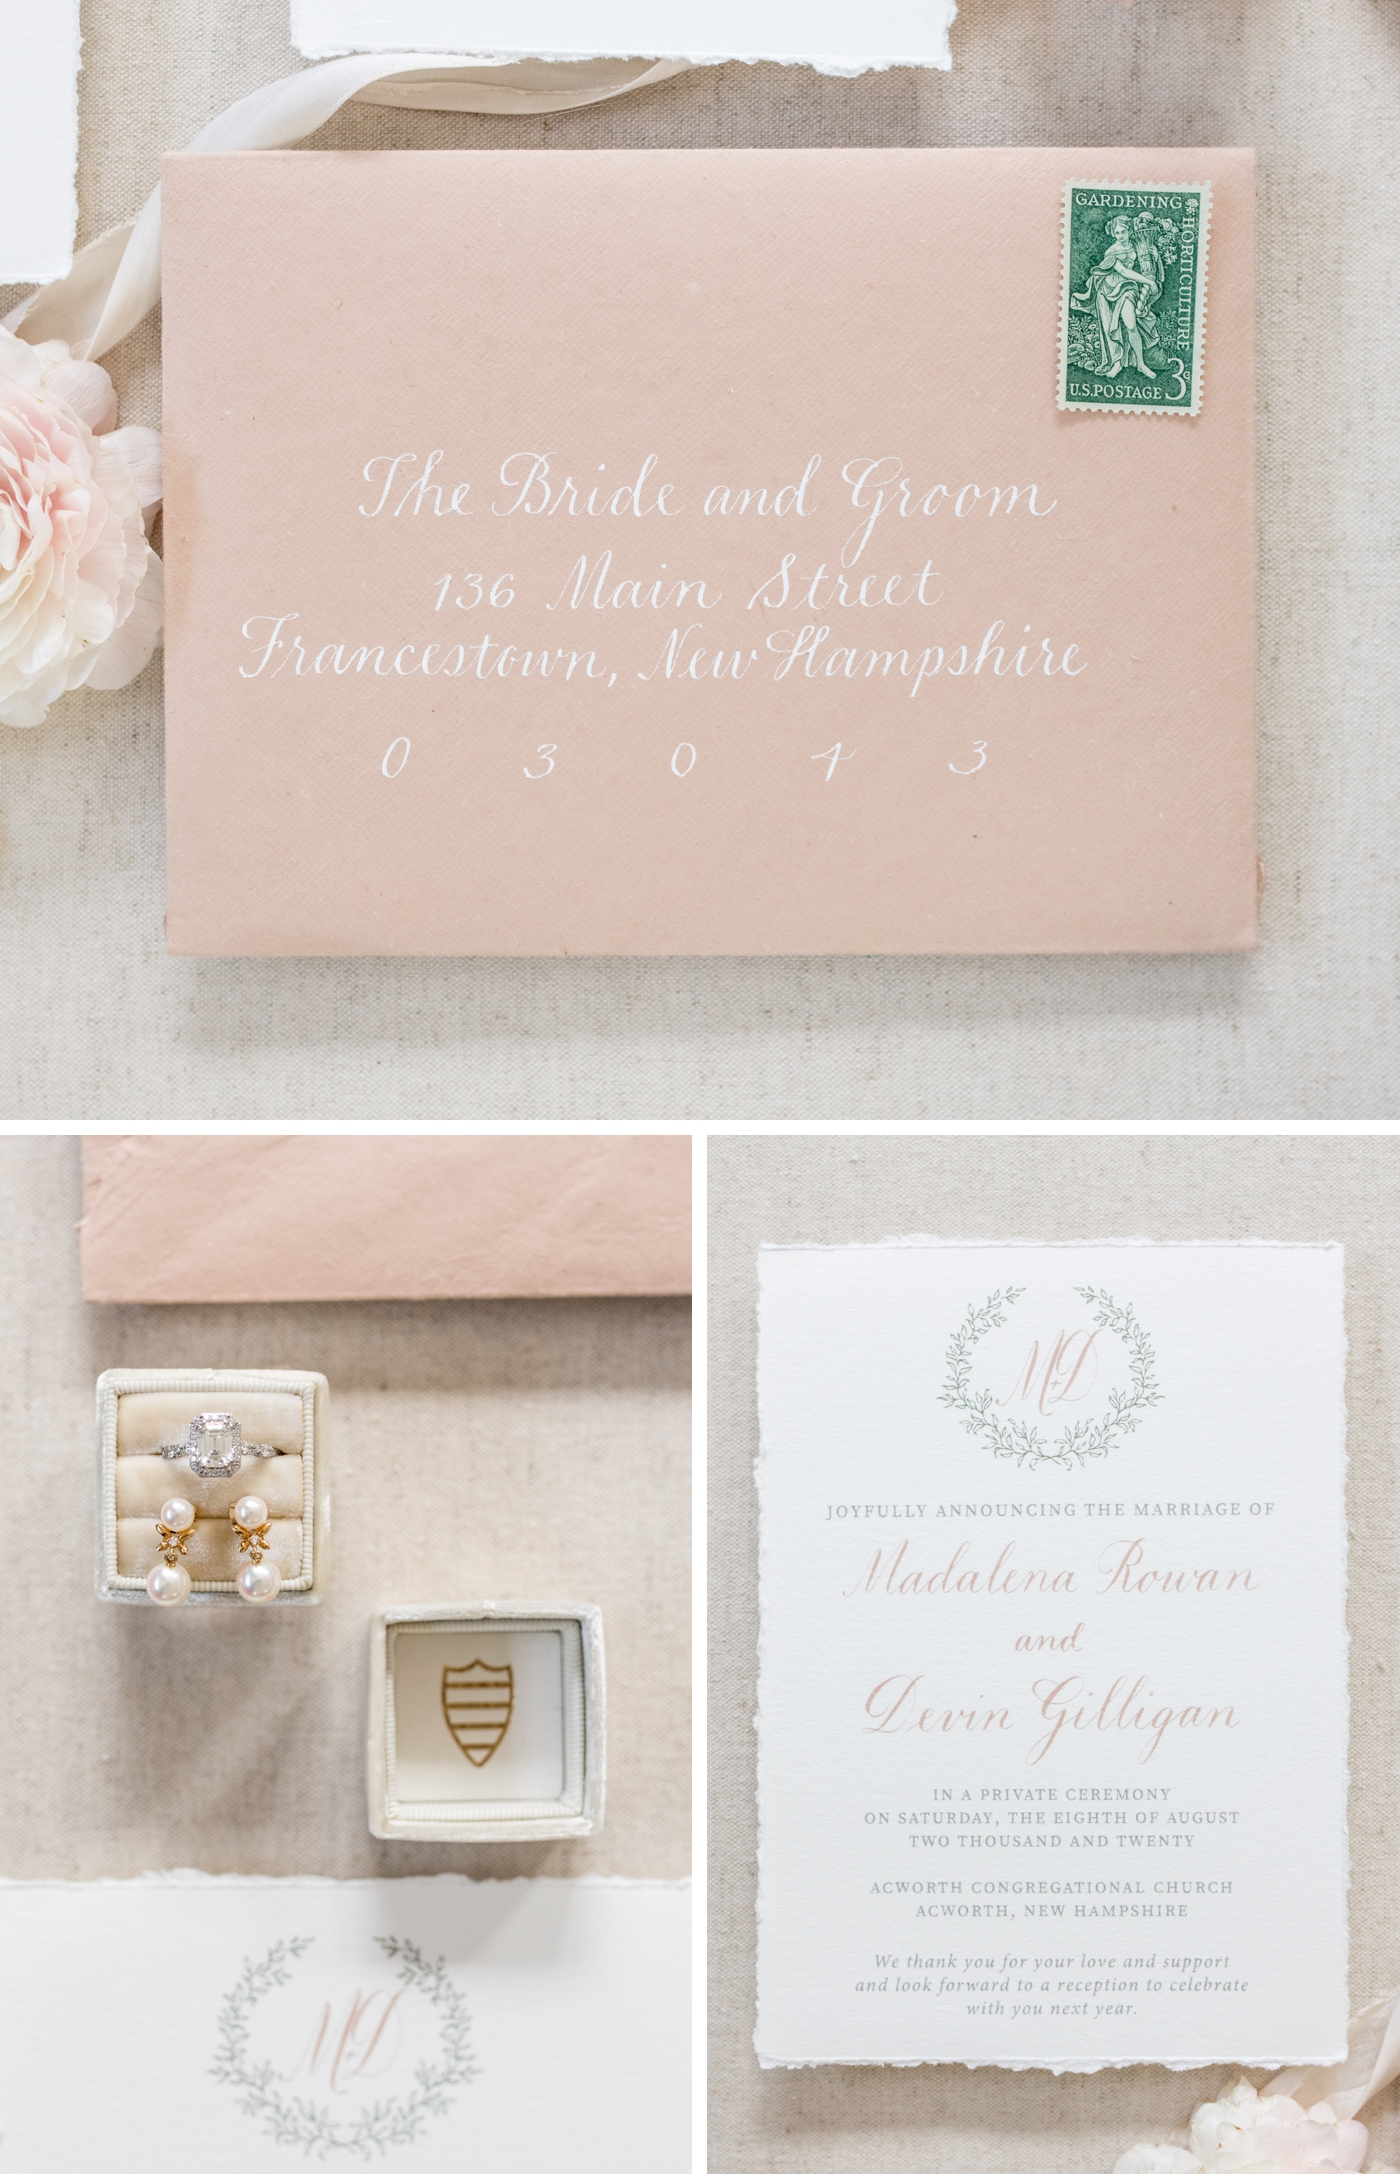 Invitations by Southern Calligraphy